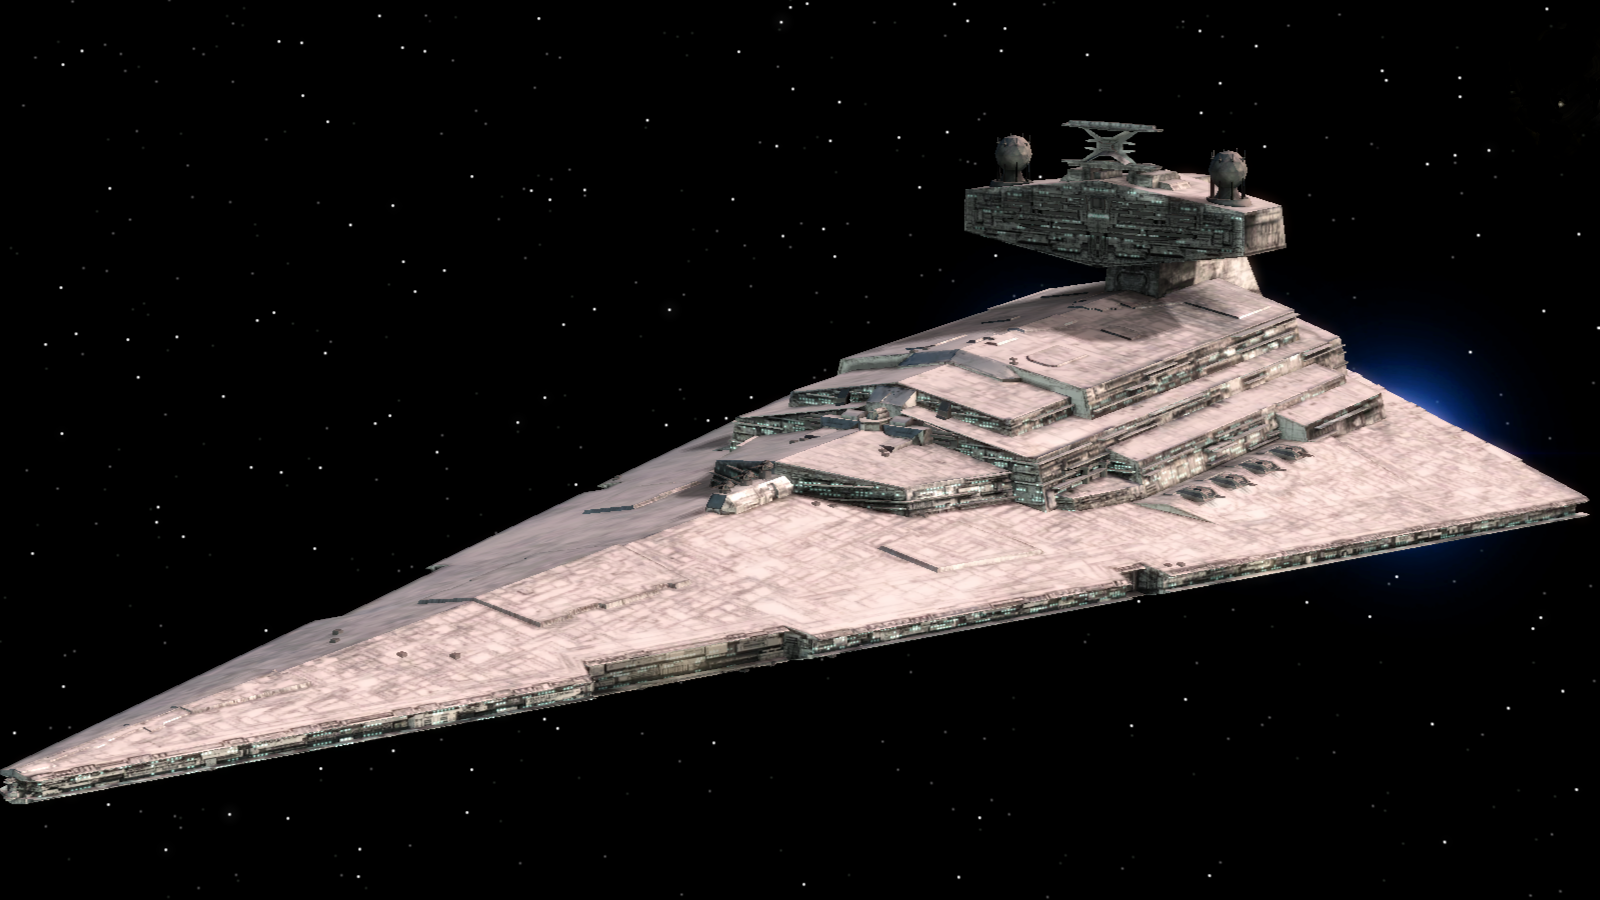 imperial navy classes star wars